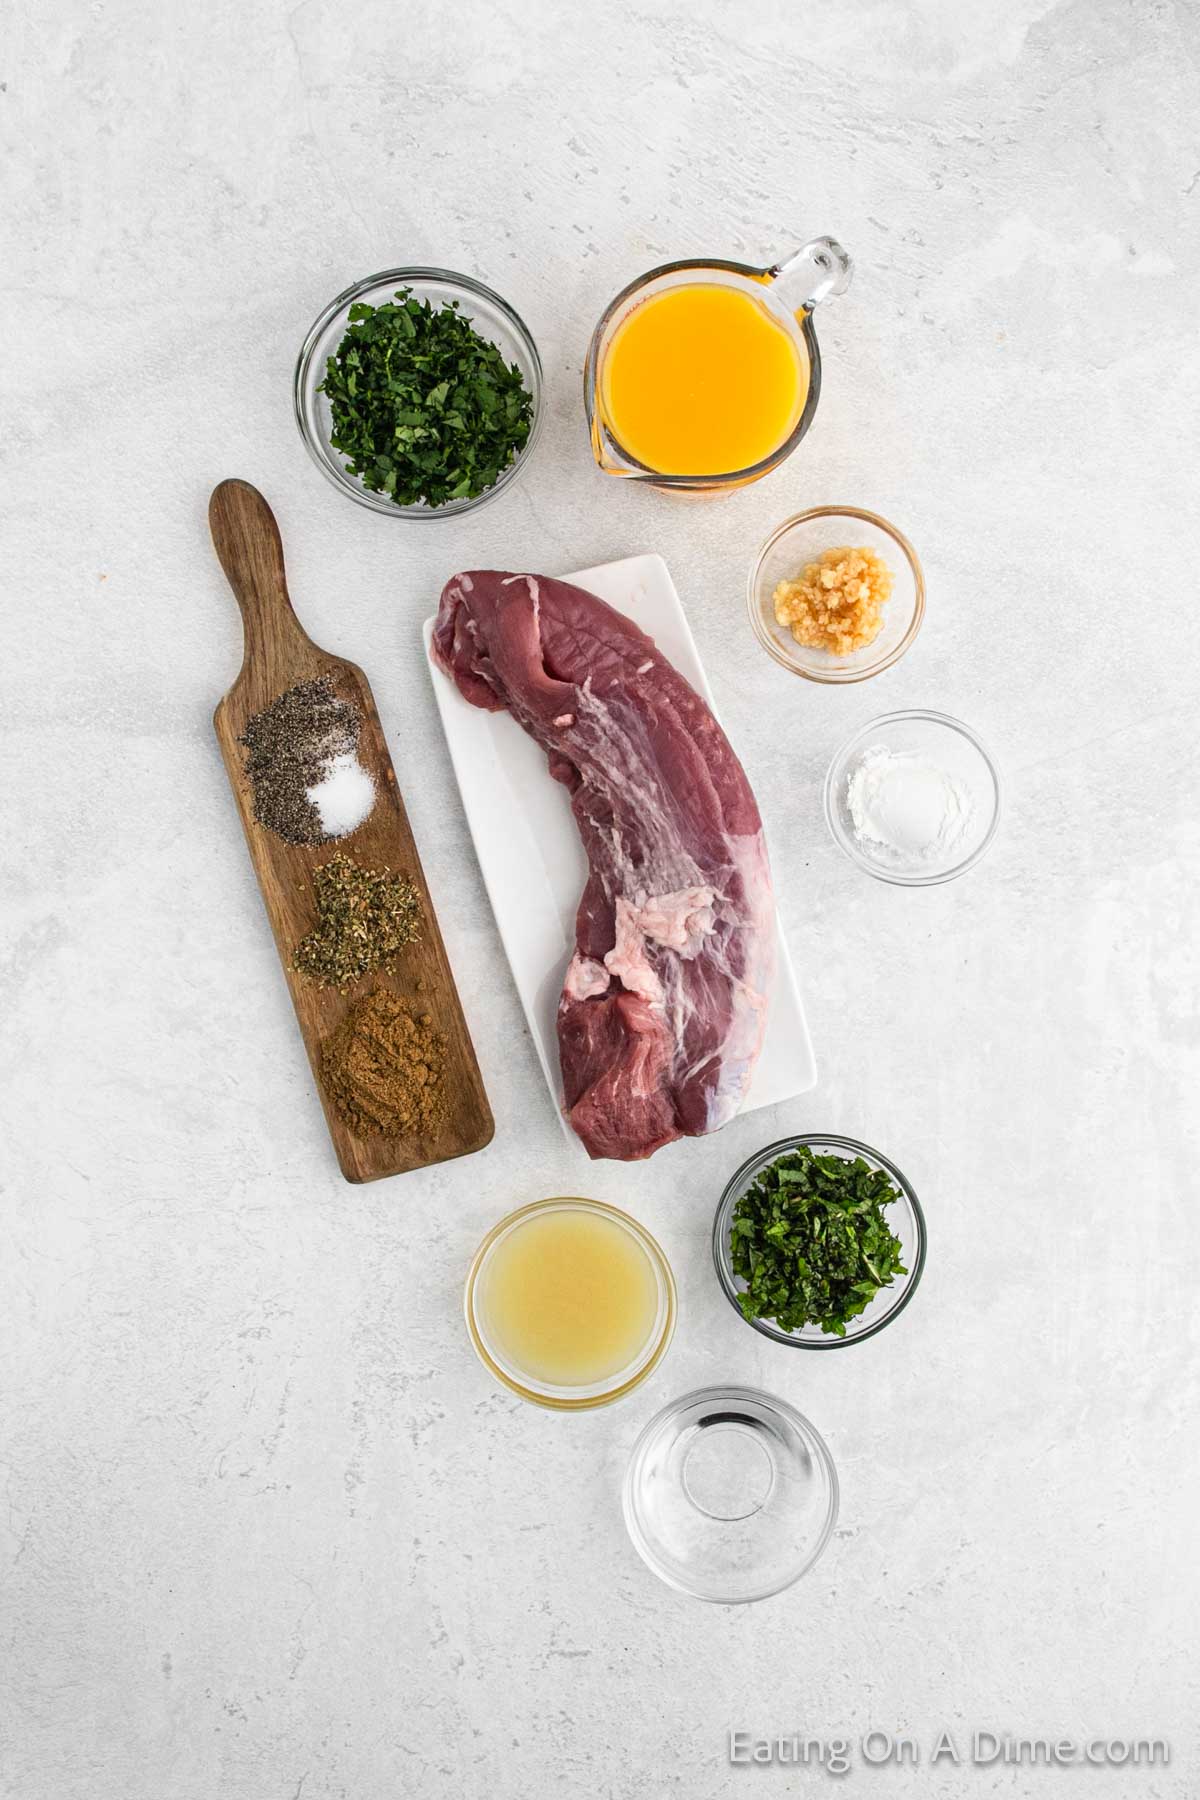 Top view of ingredients for a Crock Pot Cuban Mojo Pork Tenderloin recipe. A raw pork tenderloin sits on a white dish, surrounded by small bowls of chopped herbs, minced garlic, orange juice, lemon juice, oil, and seasonings. There is a wooden board with pepper, salt, and dried herbs.